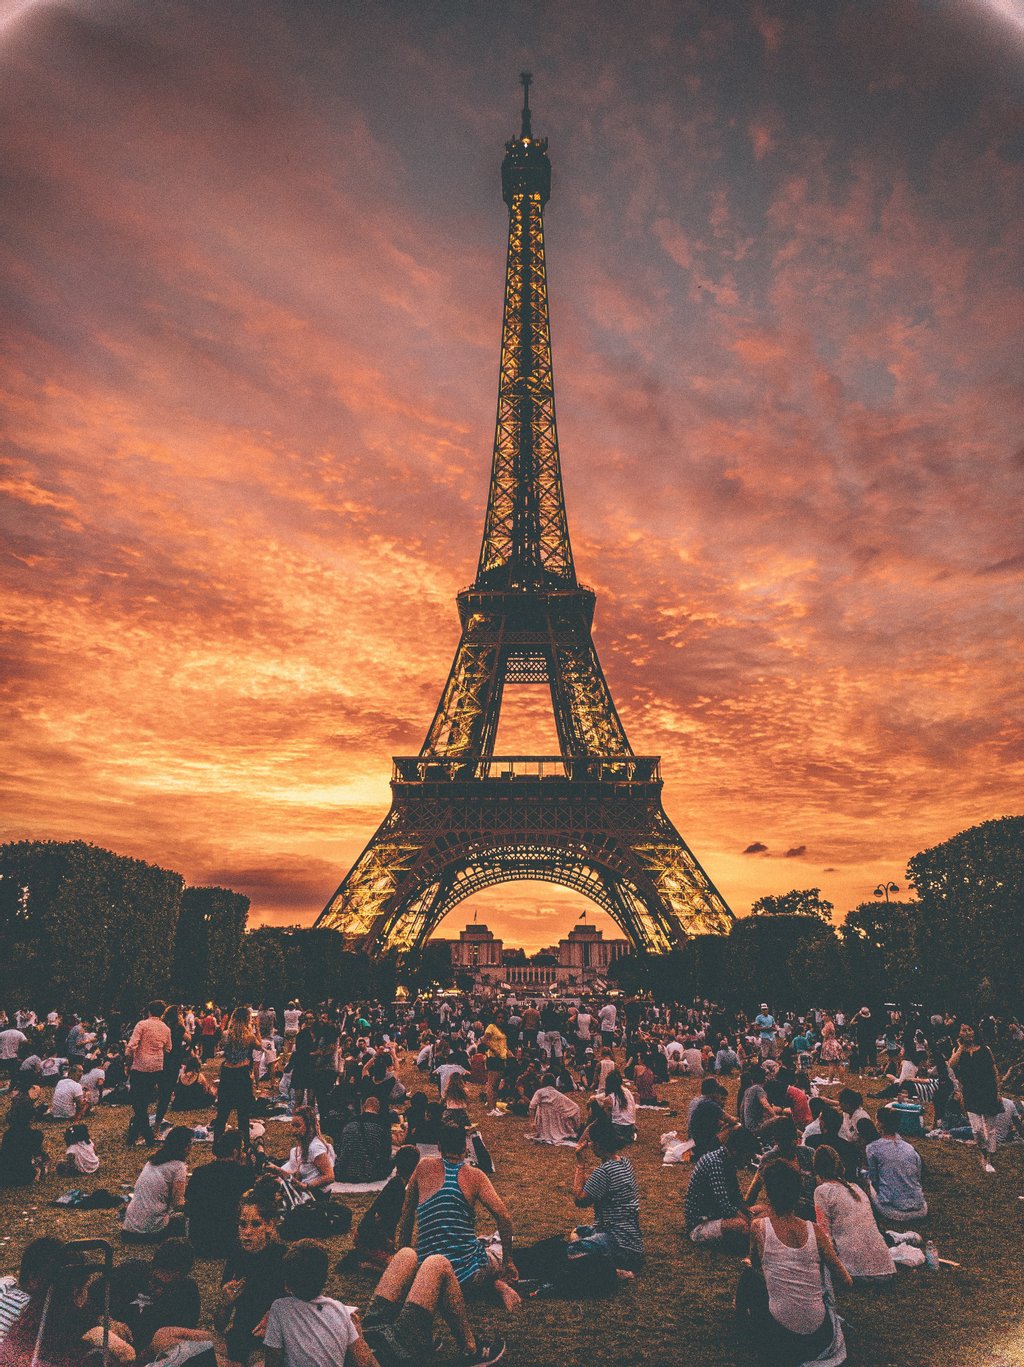 Sunset at Eiffel Tower in Paris, France